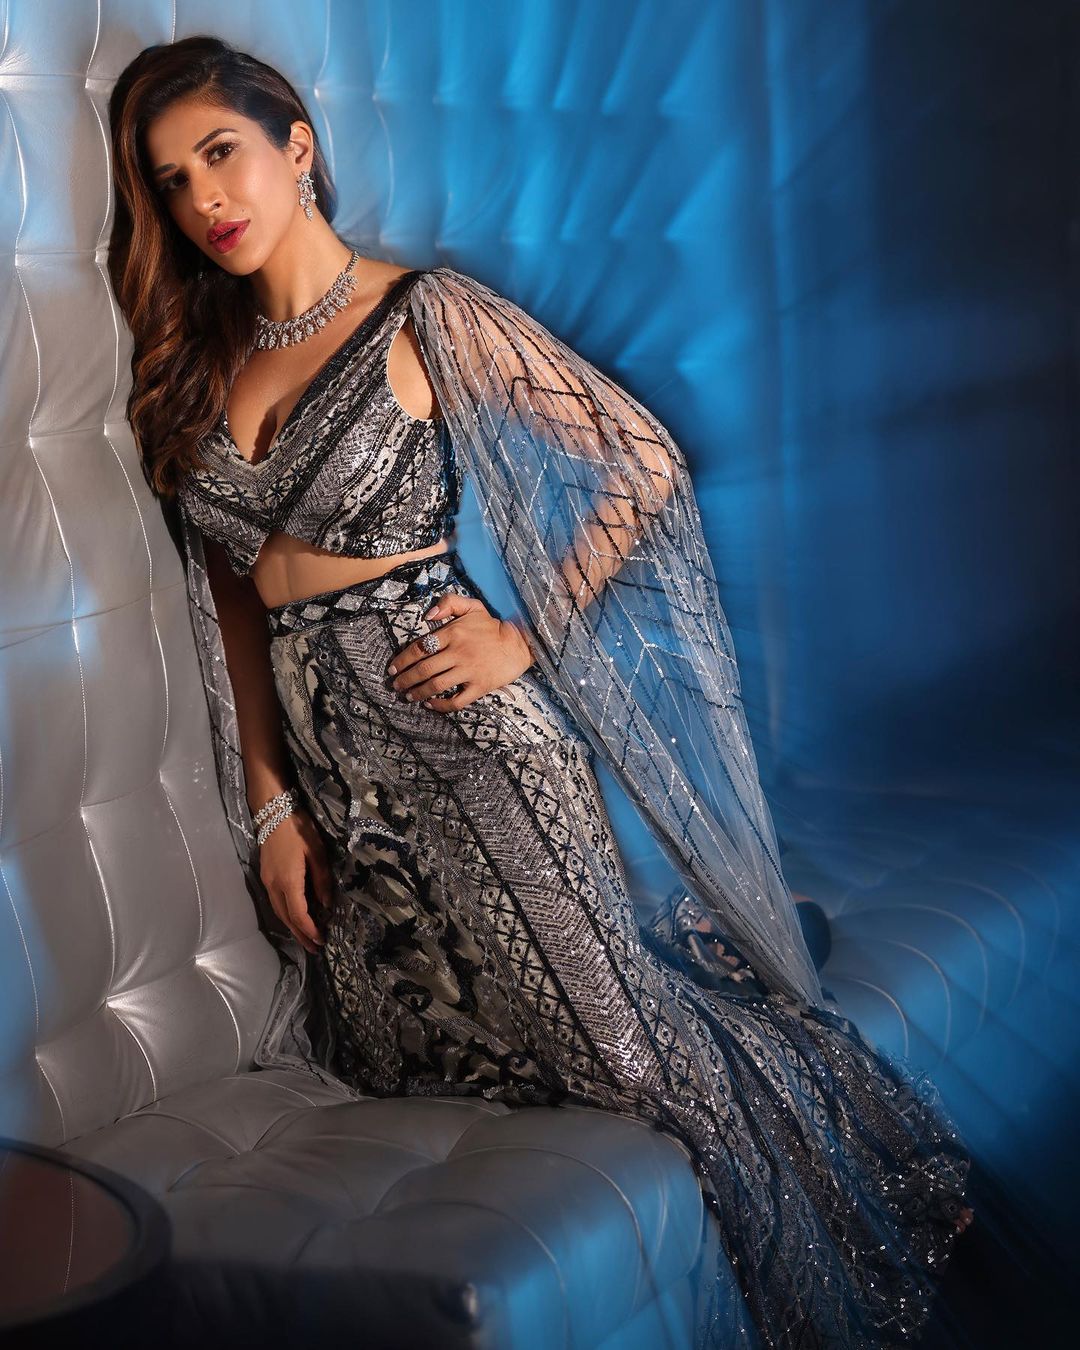 Sophie Choudry looks sizzling hot in the sequinned lehenga